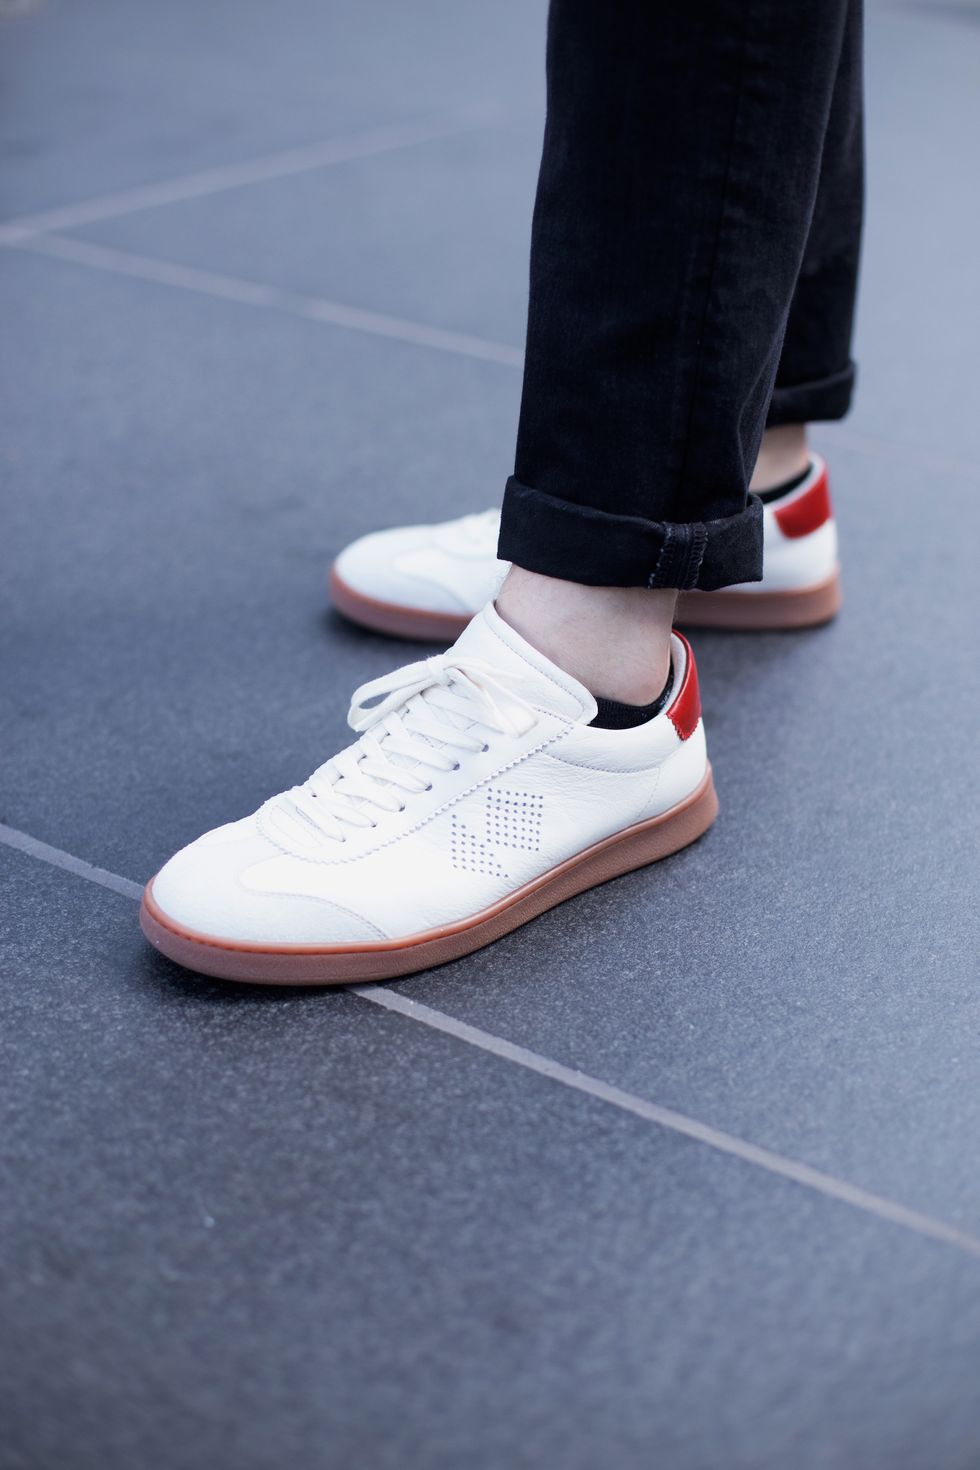 Esquire Editors Wearing Koio's New & Bianco Sneakers